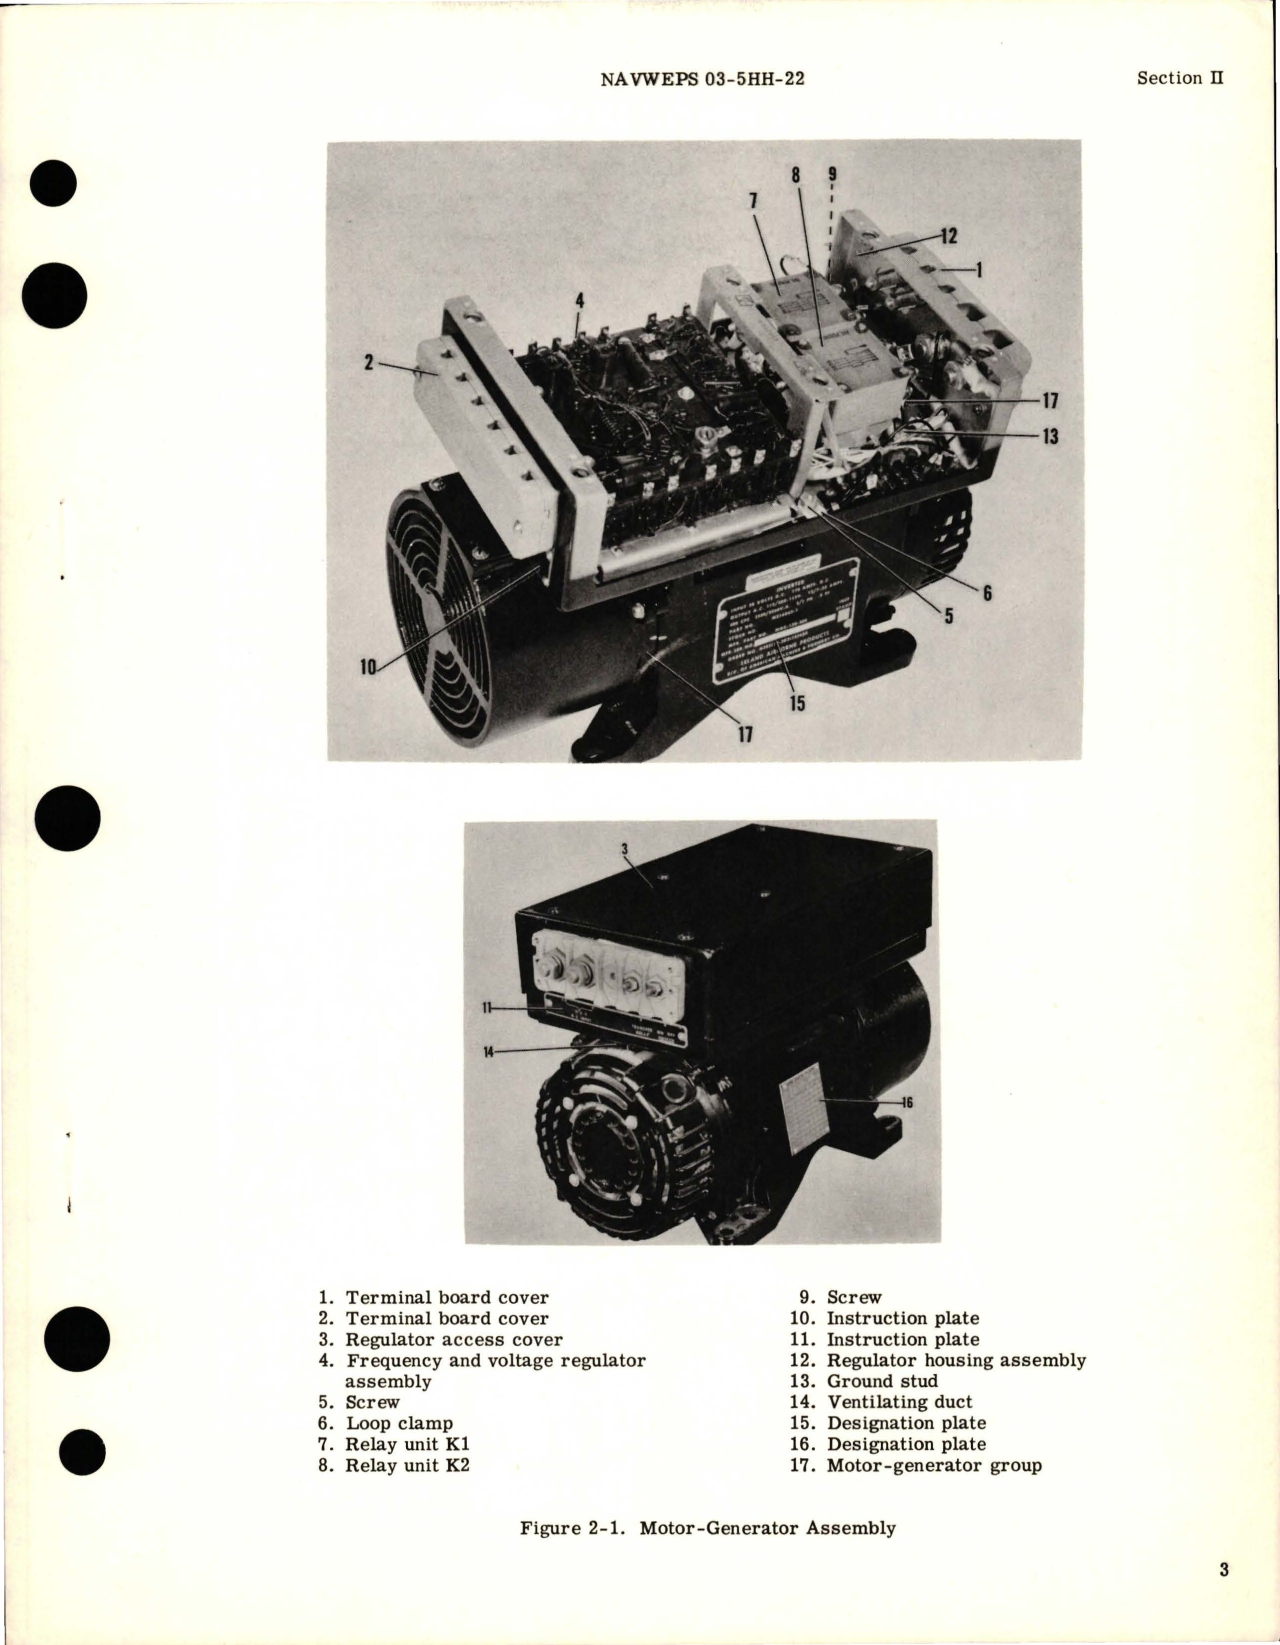 Sample page 5 from AirCorps Library document: Overhaul Instructions for Motor-Generator Assembly - Part MGE 130-200 